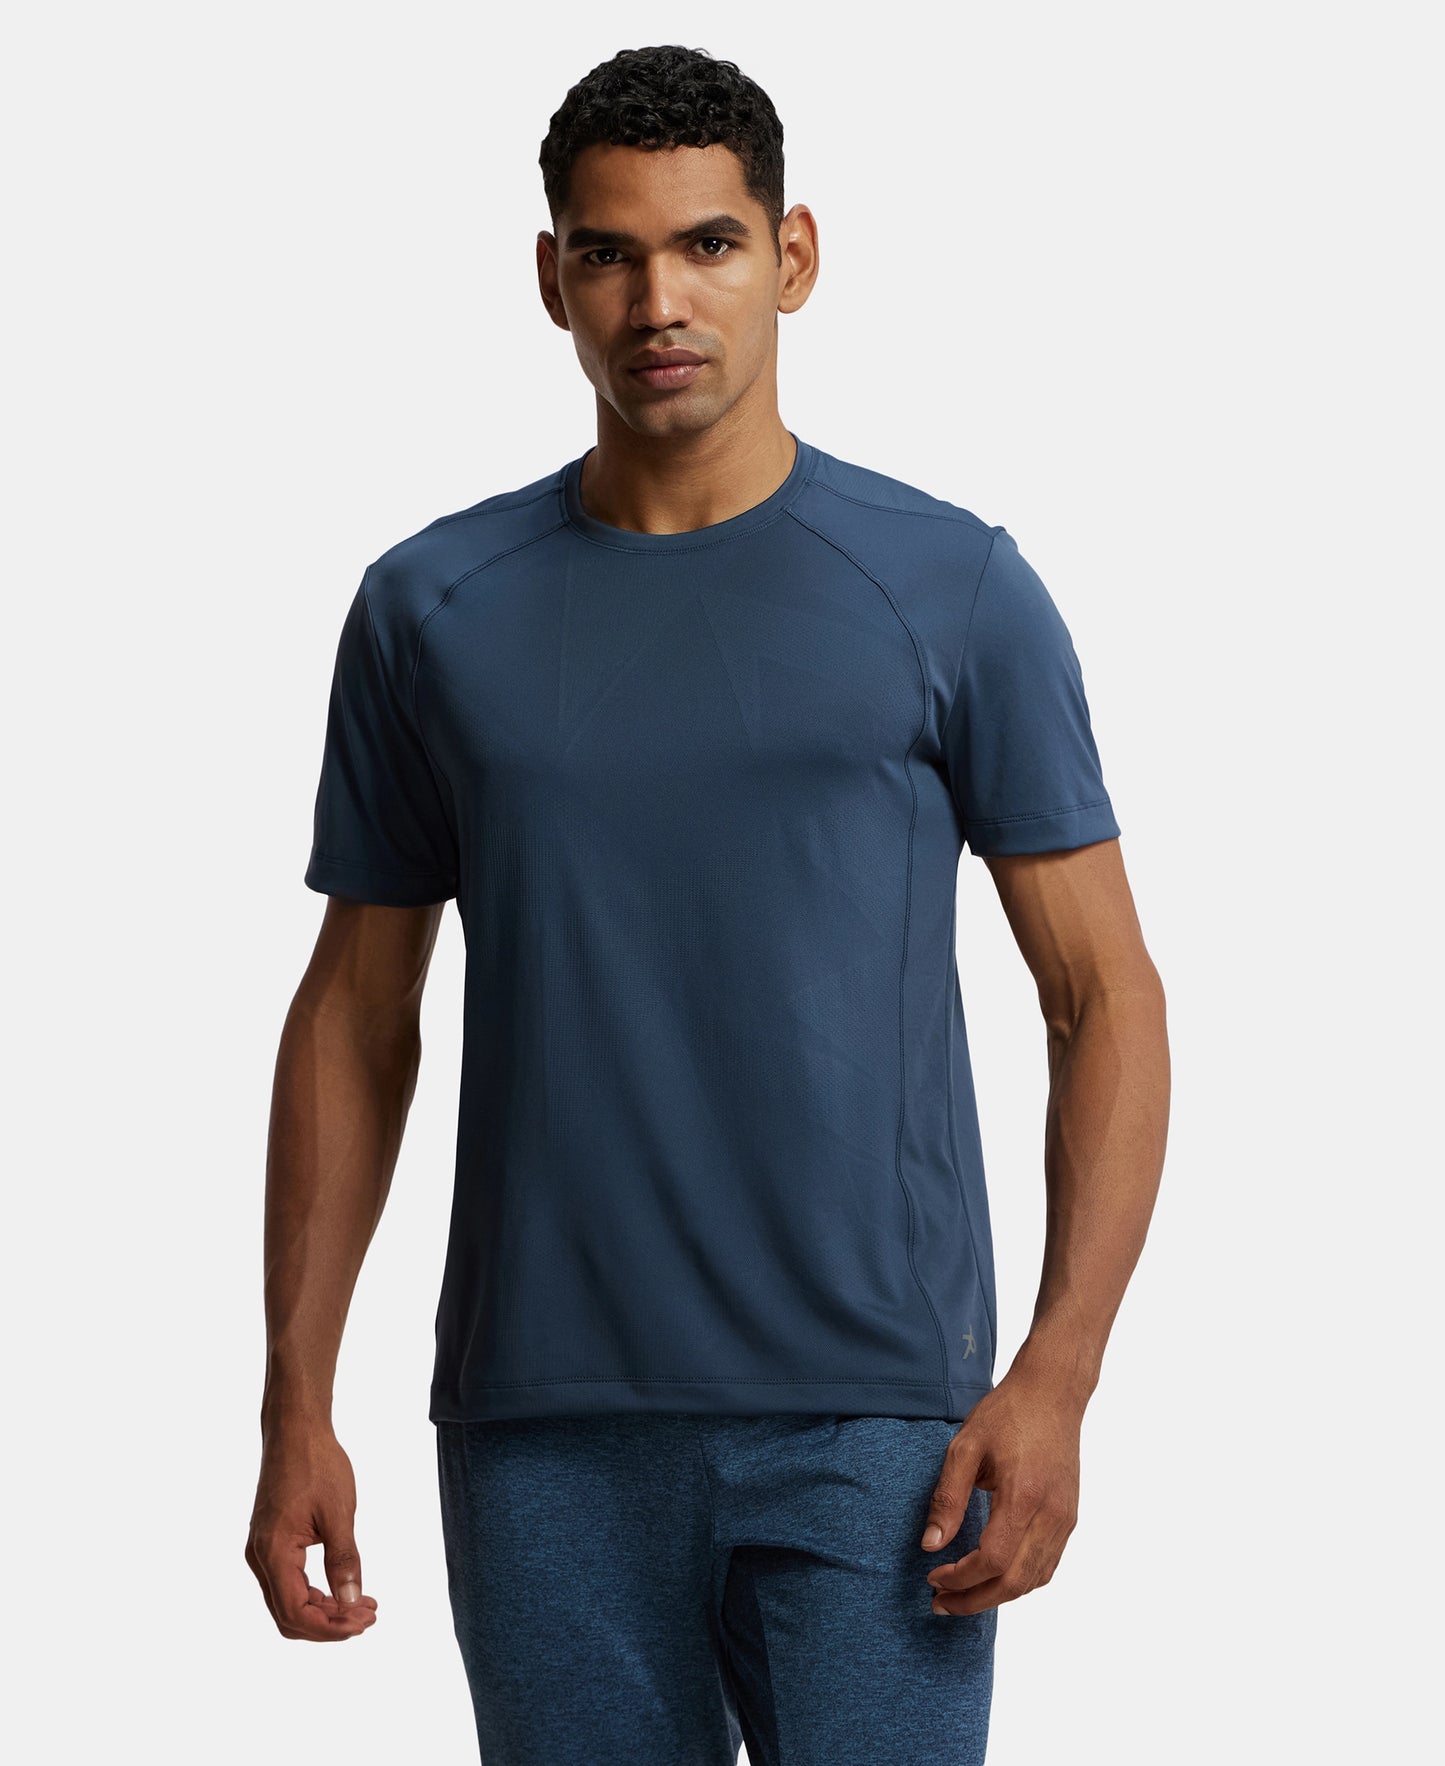 Microfiber Fabric Round Neck Half Sleeve T-Shirt with Breathable Mesh - Mid Night Navy-1